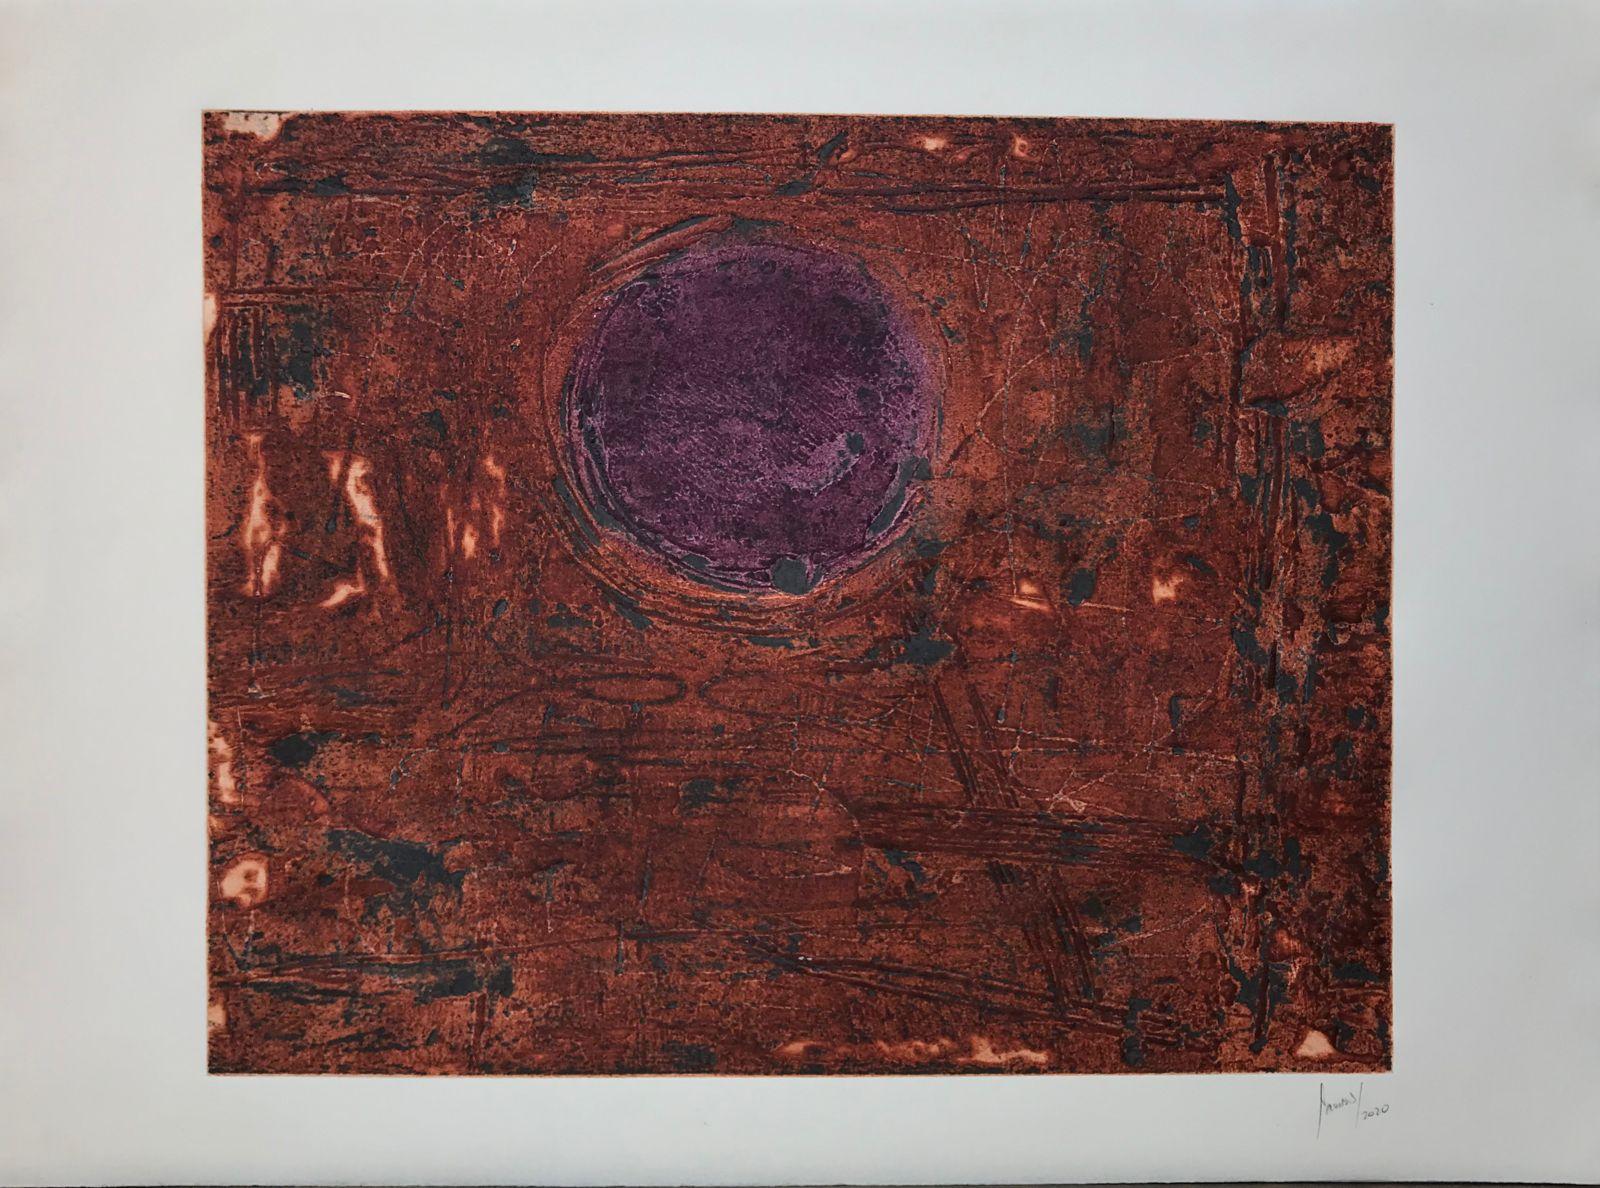 Adan Paredes (Mexico, 1961)
'Untitled 10', 2020
collagraph on paper Guarro Super Alpha 250g.
22.1 x 26.6 in. (56 x 67.5 cm.)
Unframed
ID: PAD-110
Hand-signed by author